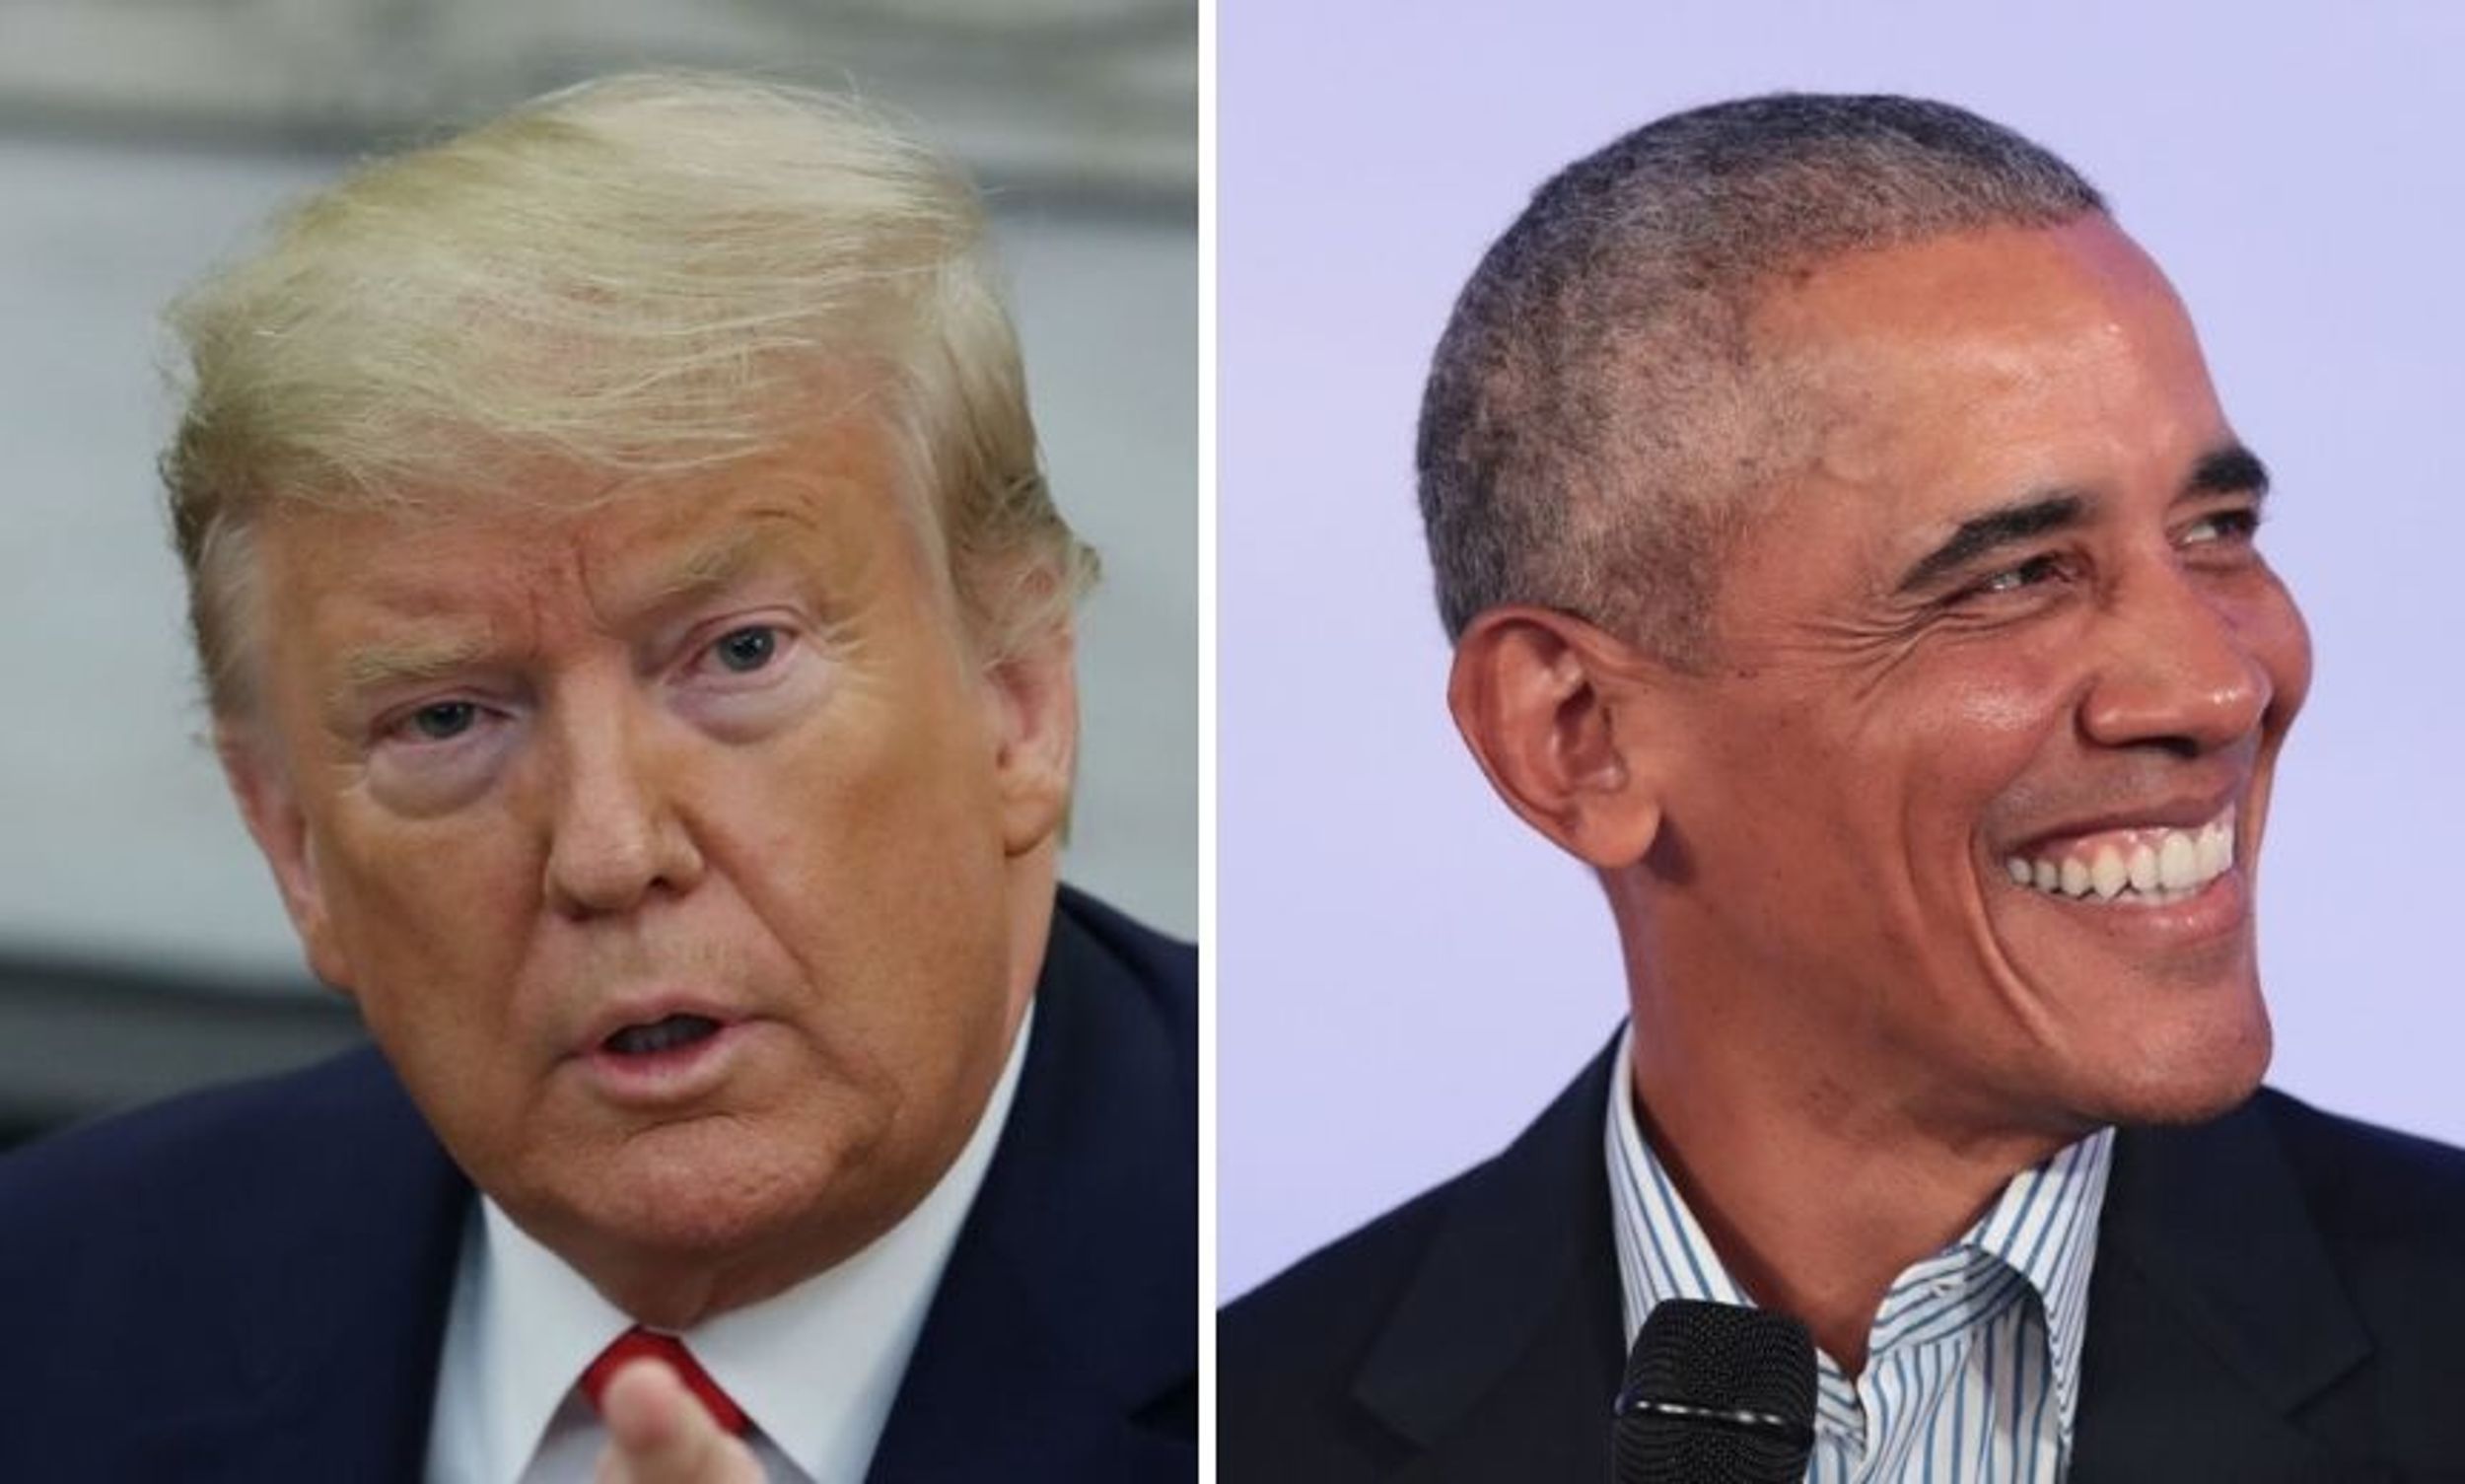 Obama Trolled Trump With Tweet Taking Credit for 'More Than a Decade of Economic Growth' and Trump Responded in the Most Trump Way